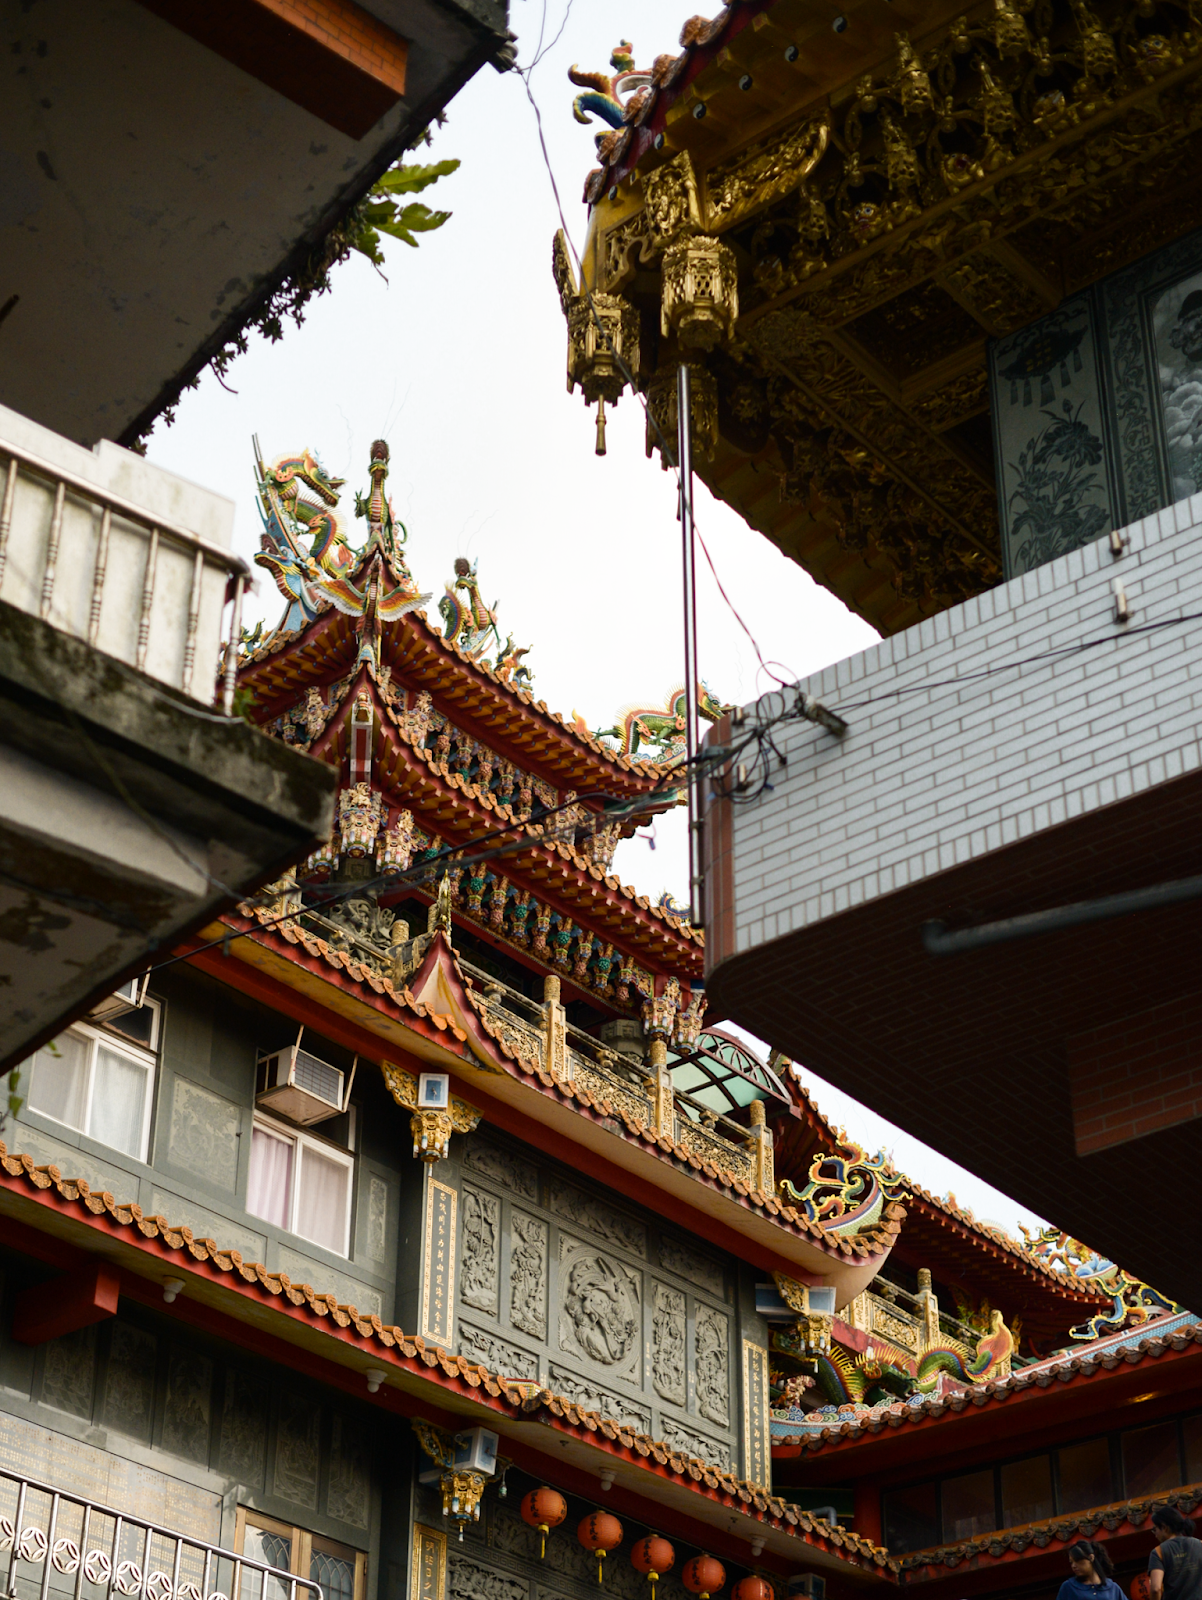 Taipei Travels, Jiufen, Jiufen Old Street, Spirited Away In Real Life, Jiufen Photos, Photos that will make you want to visit Jiufen right away, Taiwan's Jiufen, / Jiufen, Taiwan / A Real Life Spirited Away / FOREVERVANNY